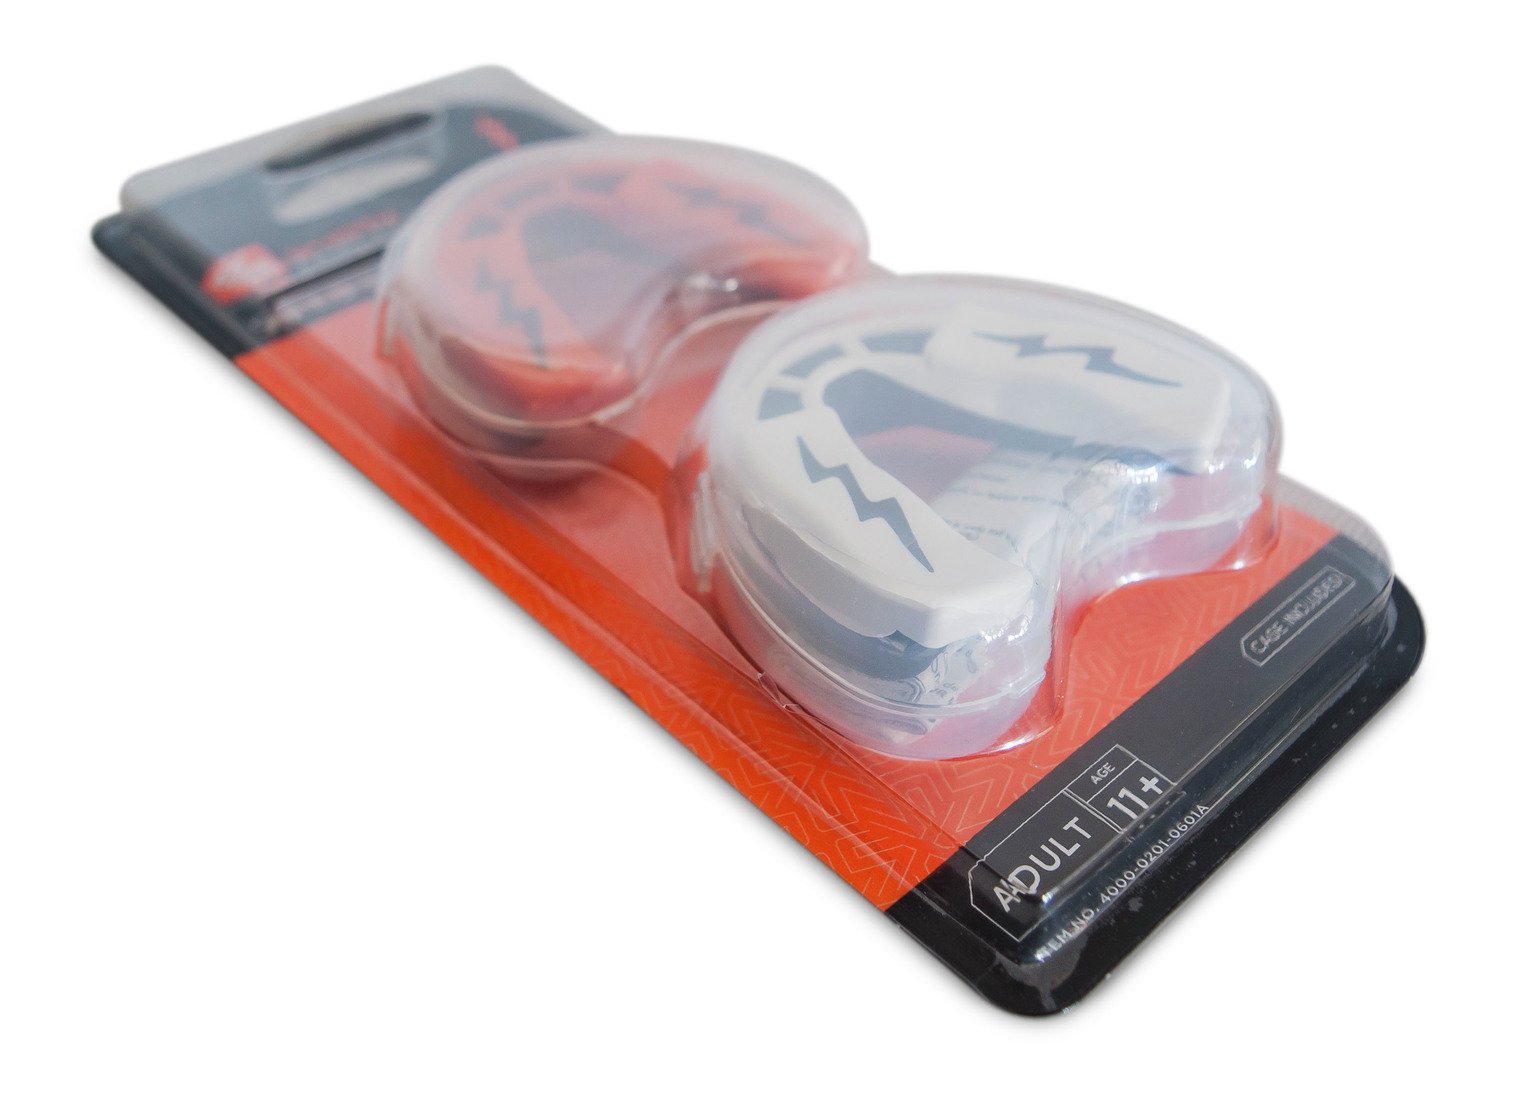 Shock Doctor V1.5 Youth Mouthguard Review